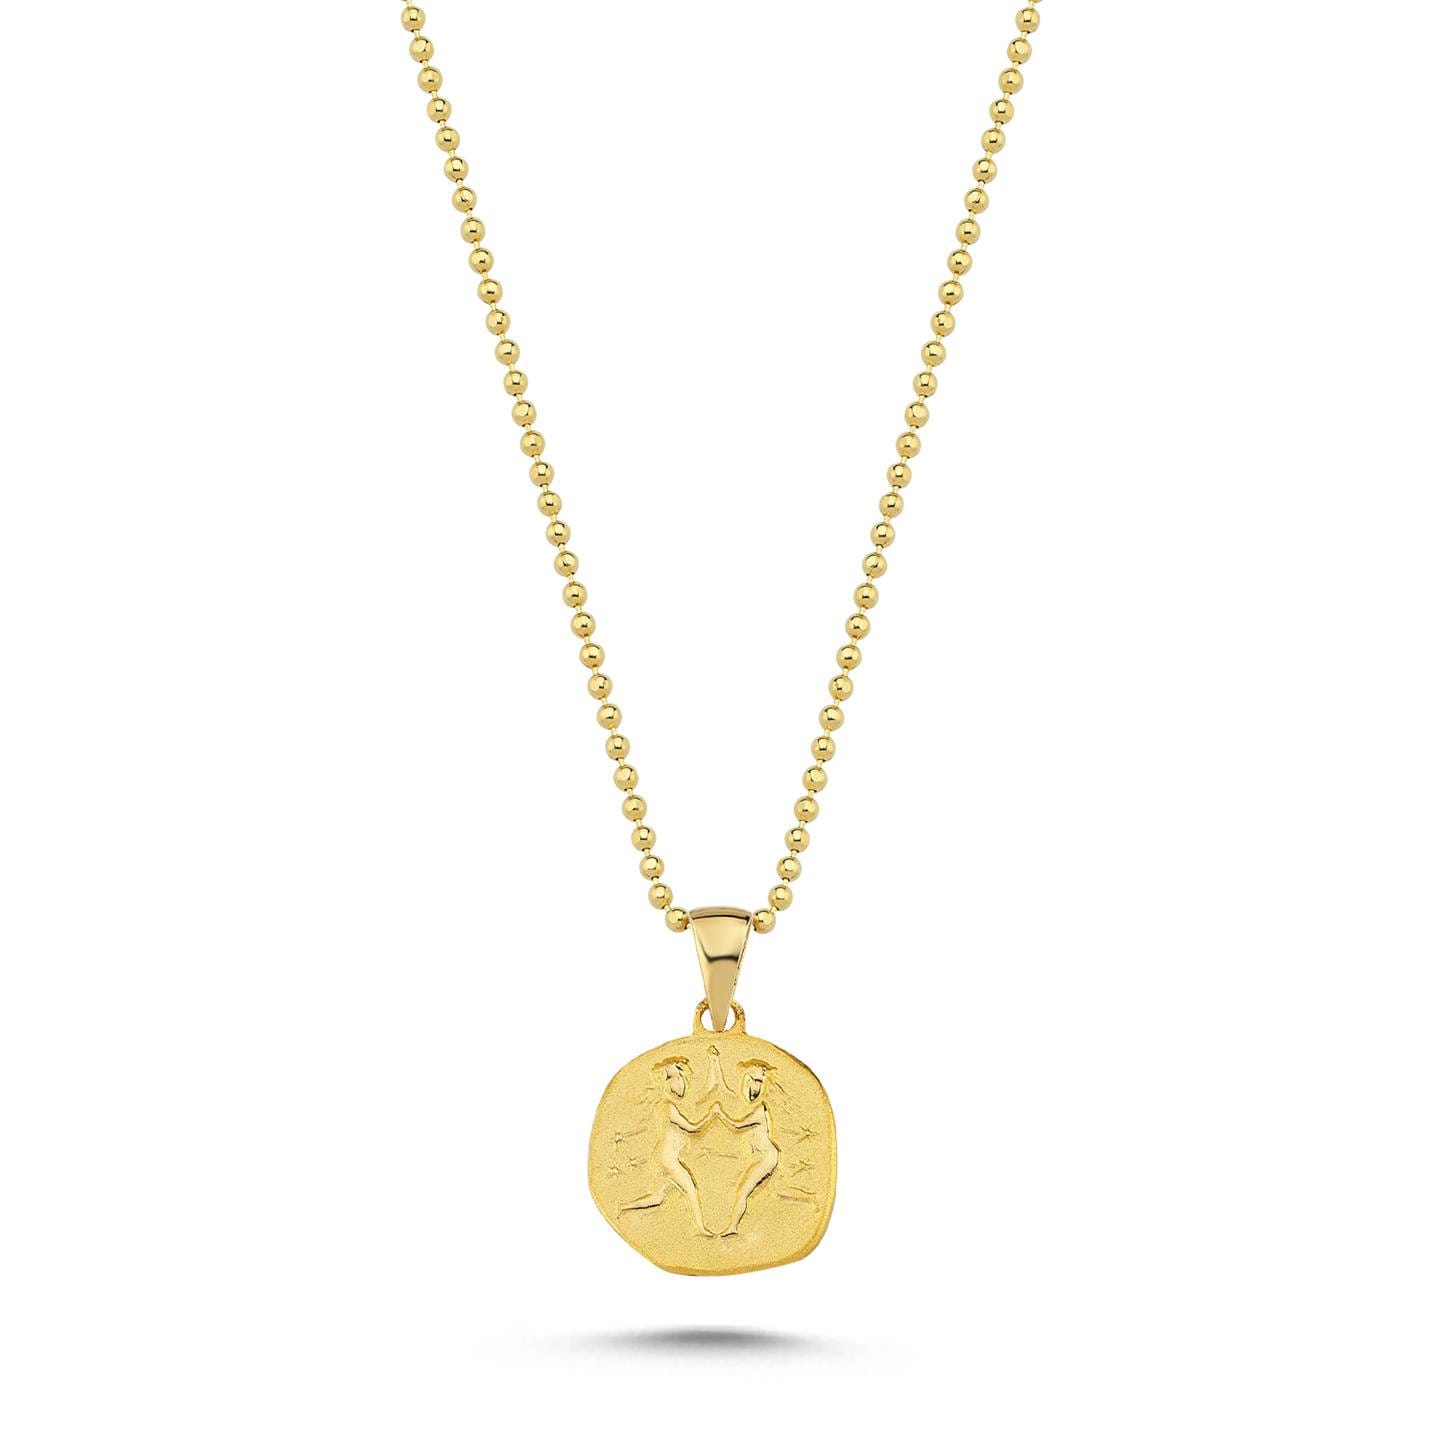 14K Gold Zodiac Gemini Necklace - Elegant Gemini Necklace - Perfect Gift for Astrology Lovers